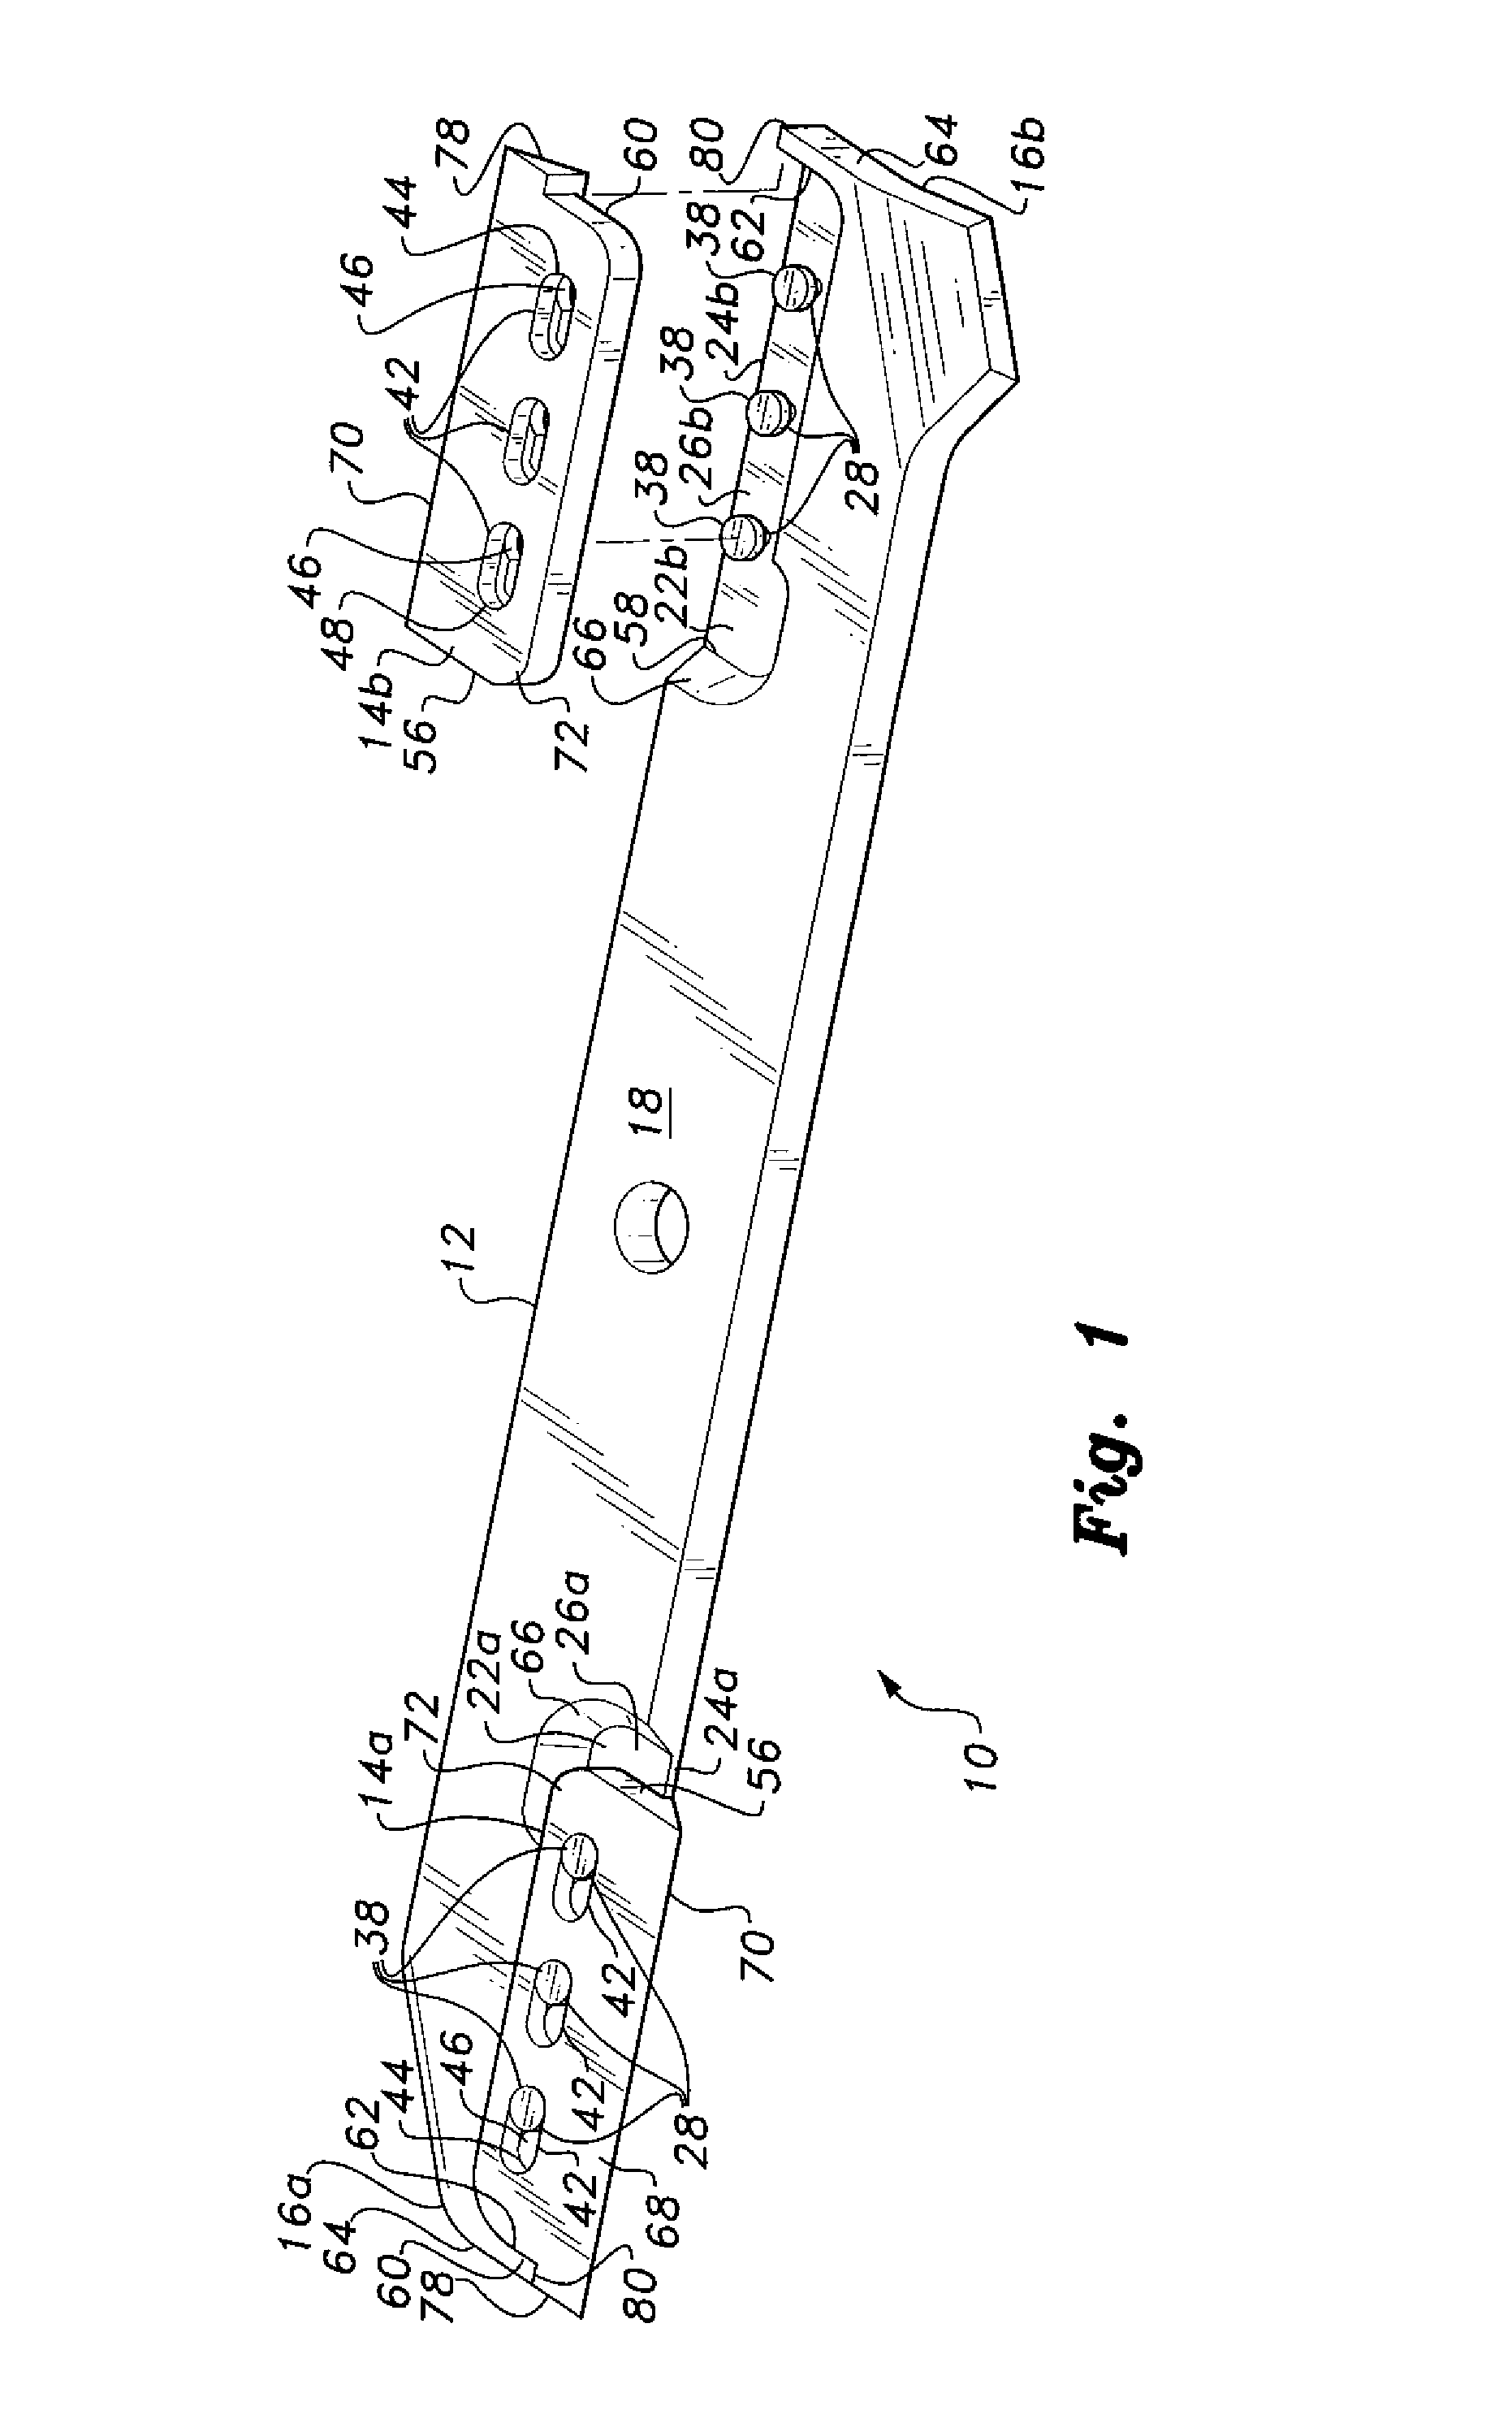 Mower blade with replaceable inserts